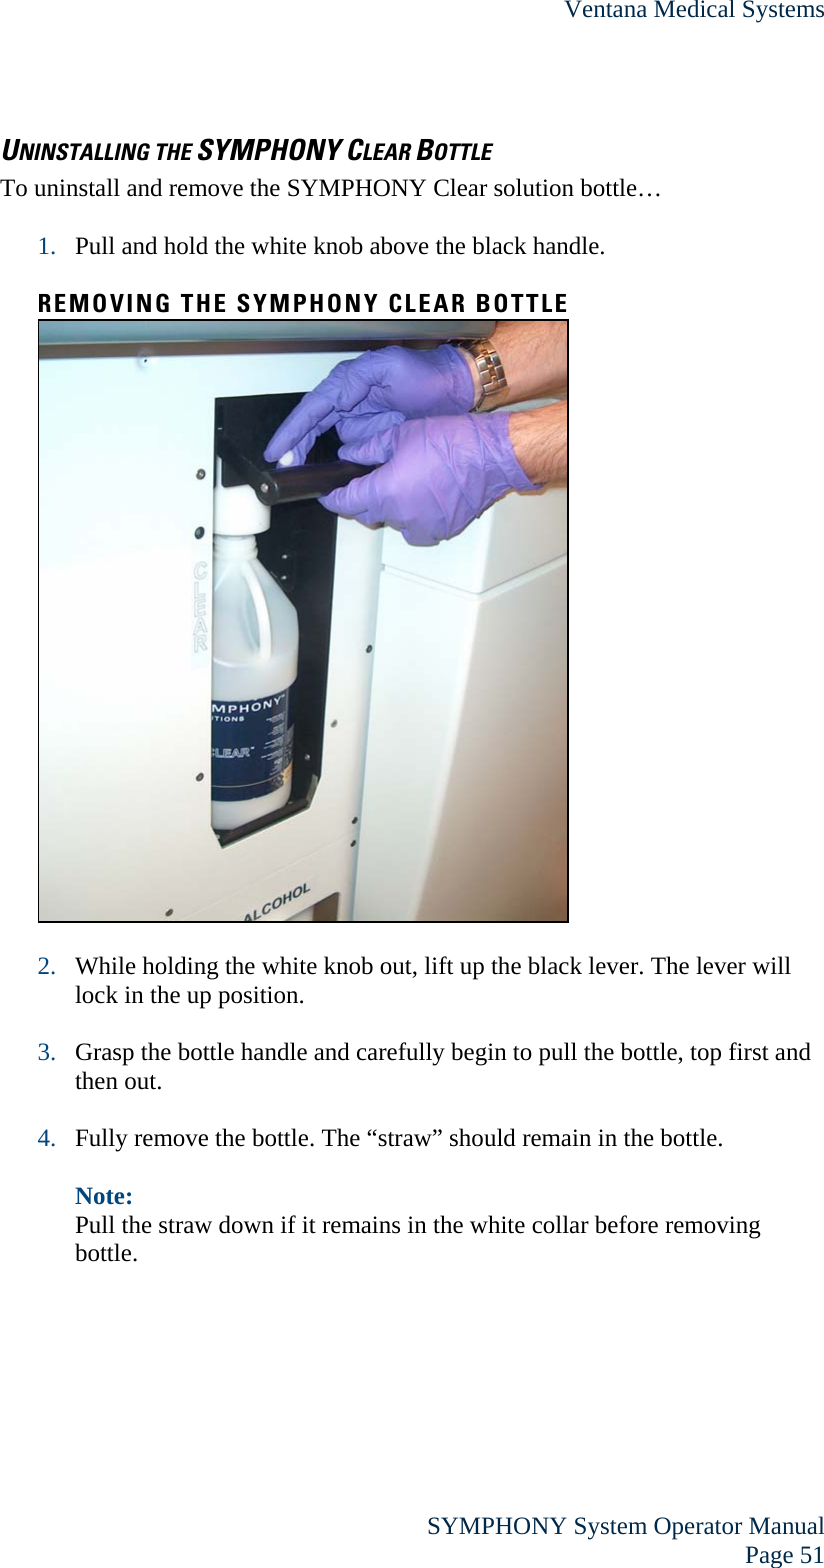 Ventana Medical Systems  SYMPHONY System Operator Manual Page 51 UNINSTALLING THE SYMPHONY CLEAR BOTTLE To uninstall and remove the SYMPHONY Clear solution bottle…  1. Pull and hold the white knob above the black handle.  REMOVING THE SYMPHONY CLEAR BOTTLE   2. While holding the white knob out, lift up the black lever. The lever will lock in the up position.  3. Grasp the bottle handle and carefully begin to pull the bottle, top first and then out.   4. Fully remove the bottle. The “straw” should remain in the bottle.  Note: Pull the straw down if it remains in the white collar before removing bottle.  